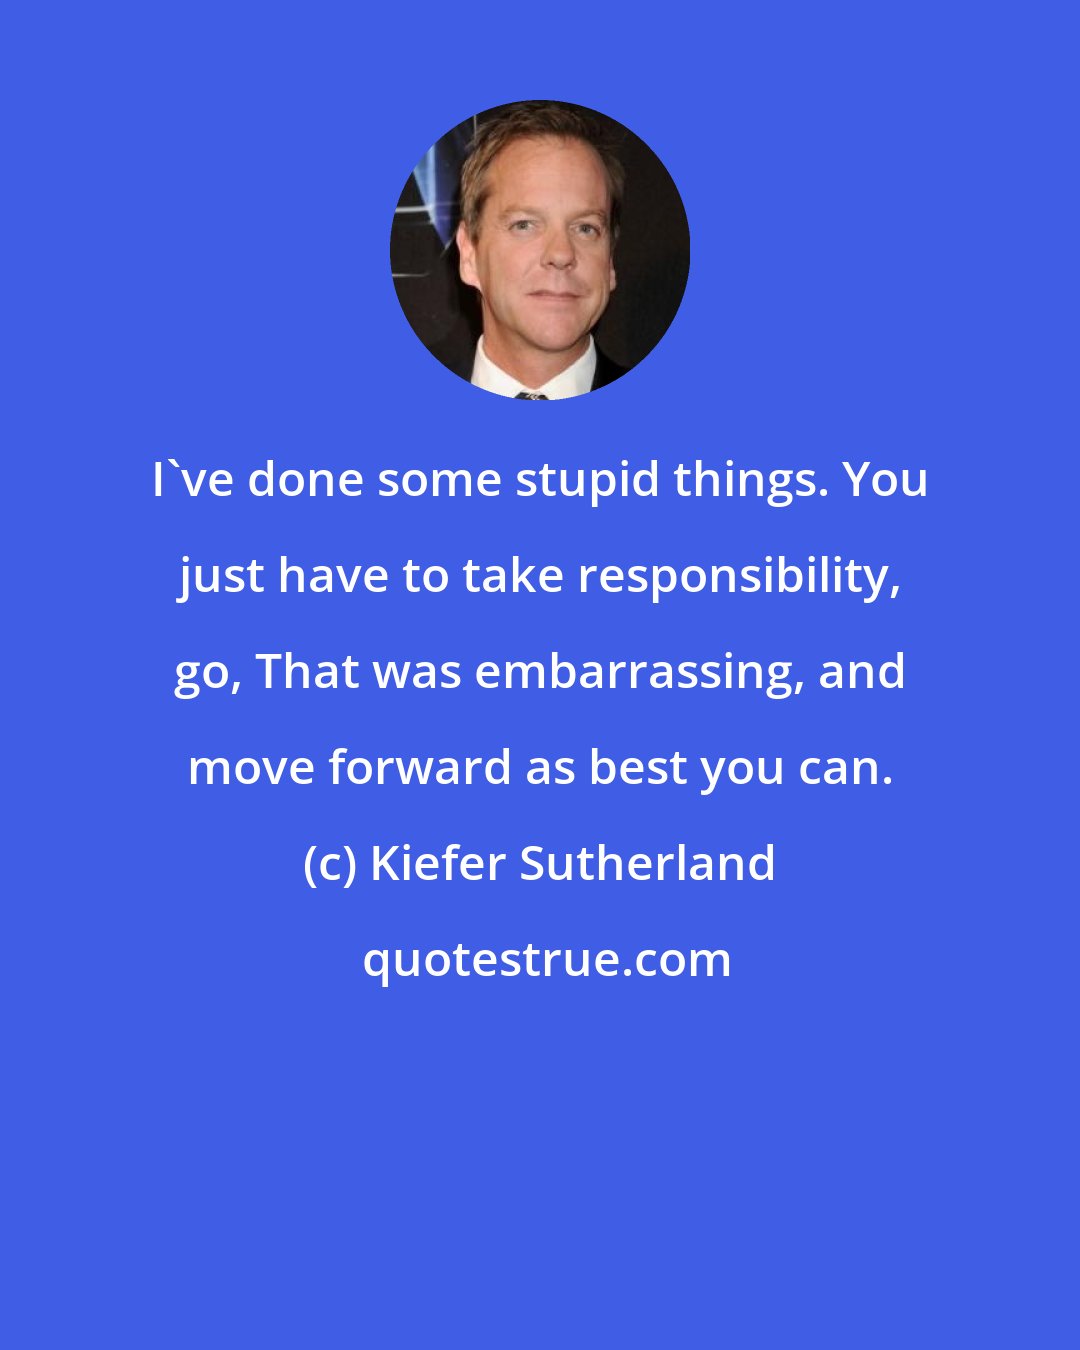 Kiefer Sutherland: I've done some stupid things. You just have to take responsibility, go, That was embarrassing, and move forward as best you can.